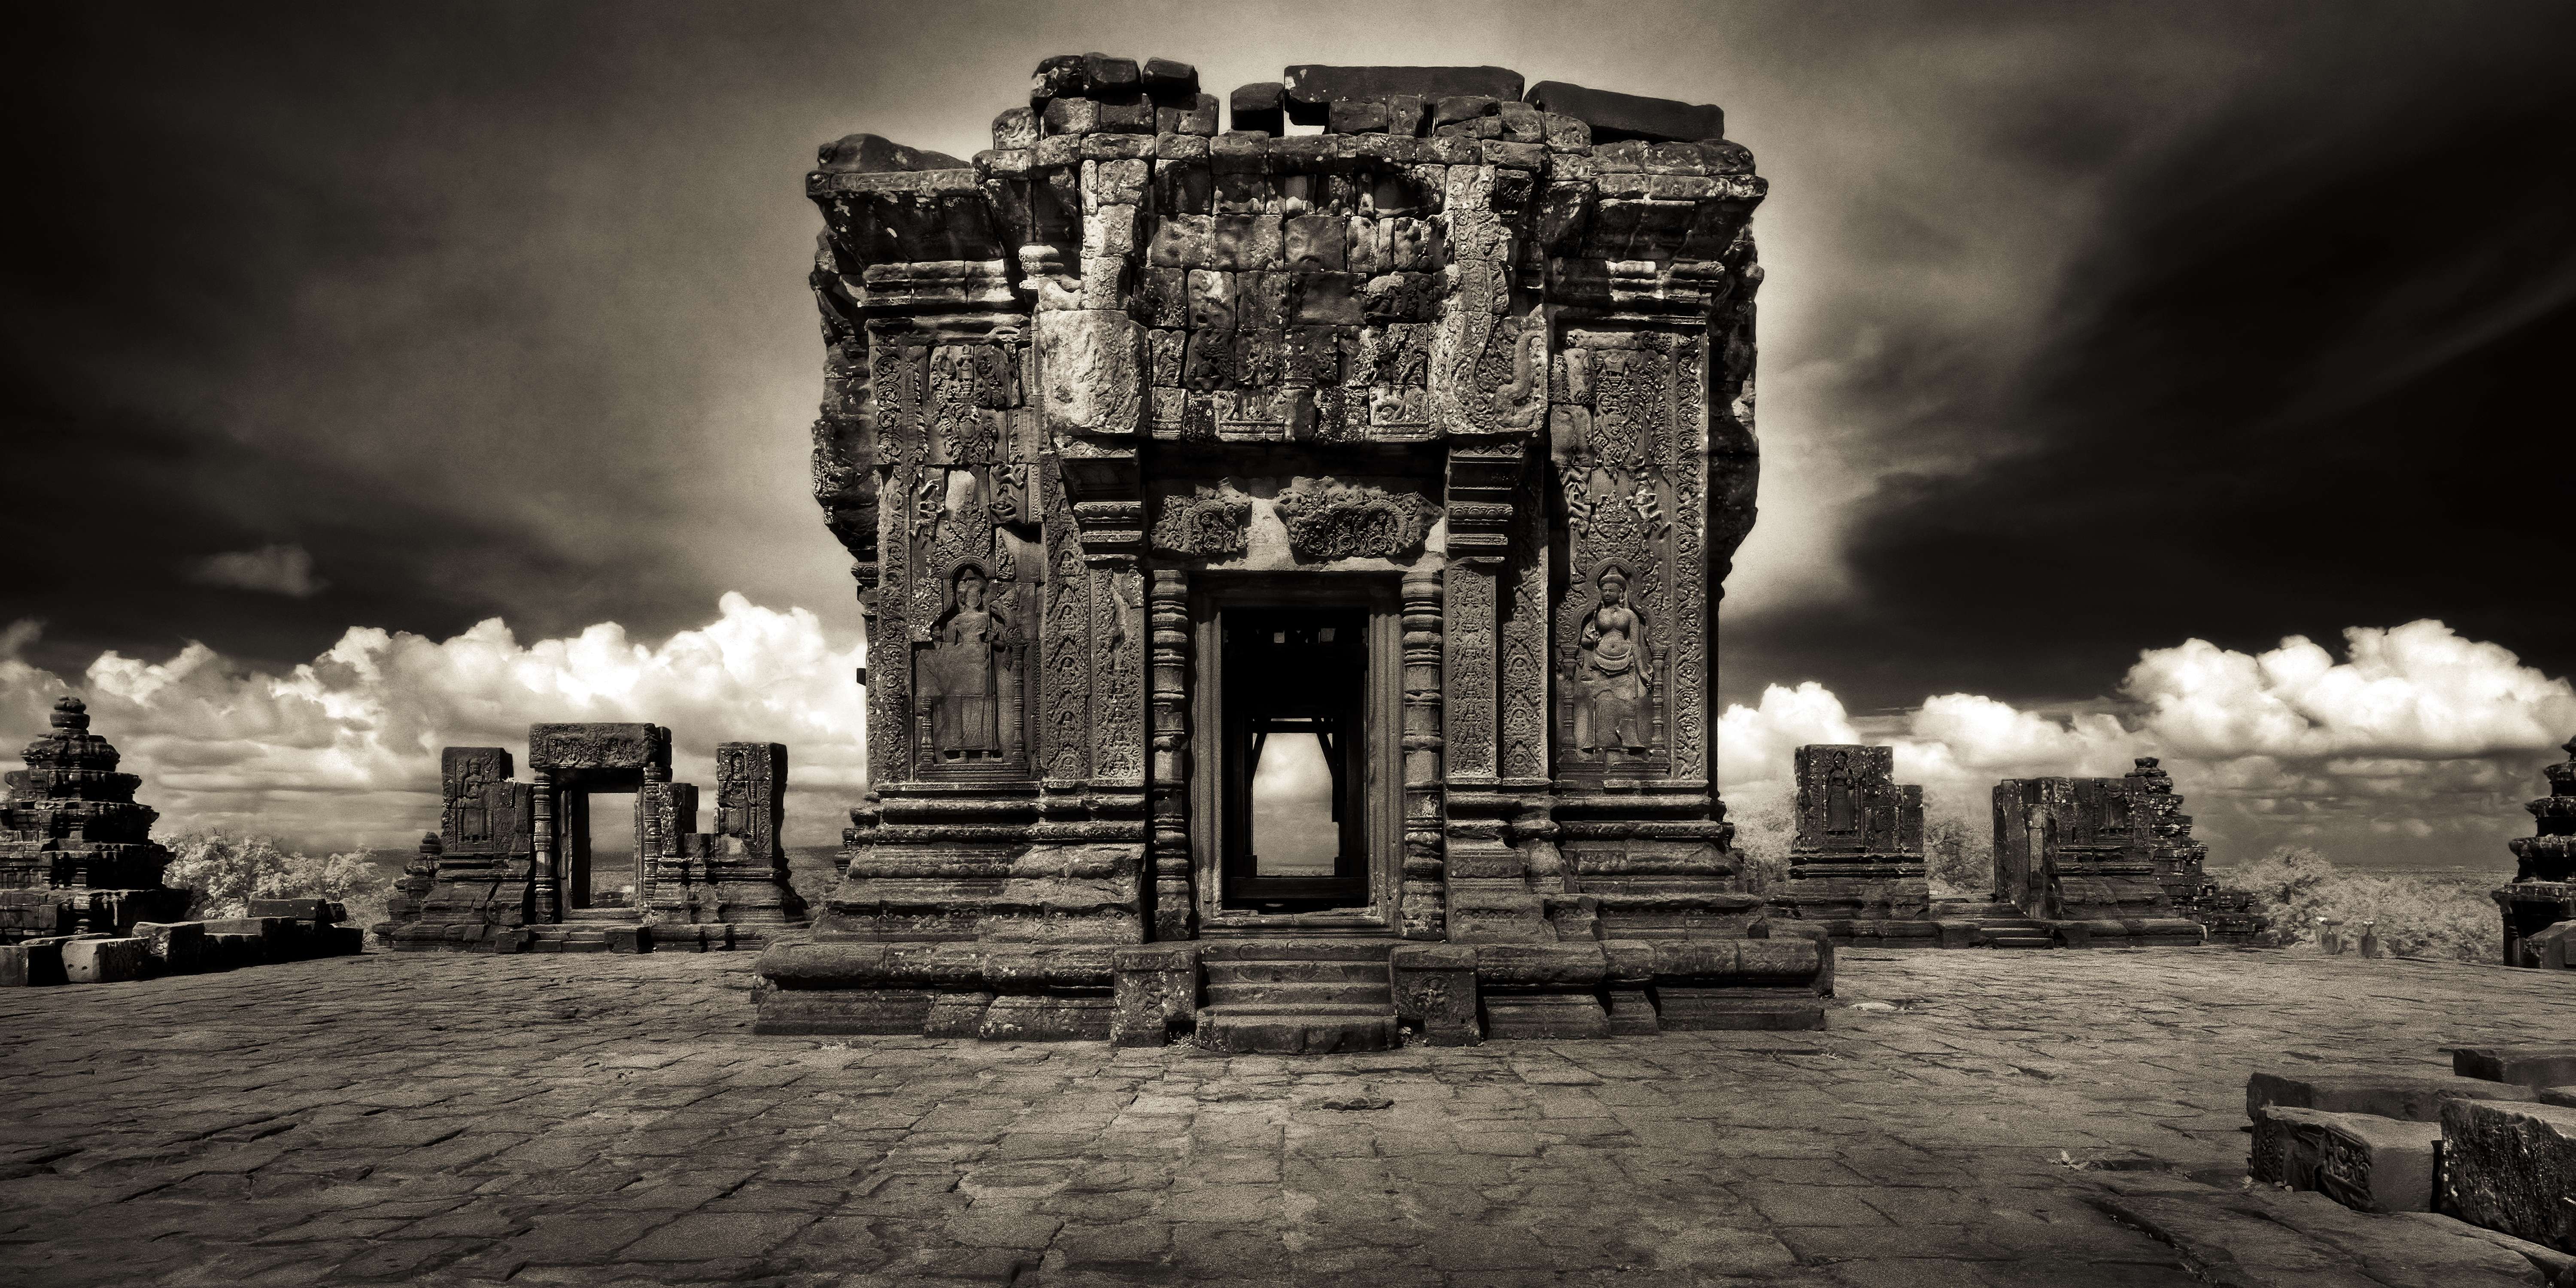 American John McDermott’s use of infrared film captures an otherworldly perspective of the Cambodian temple complex